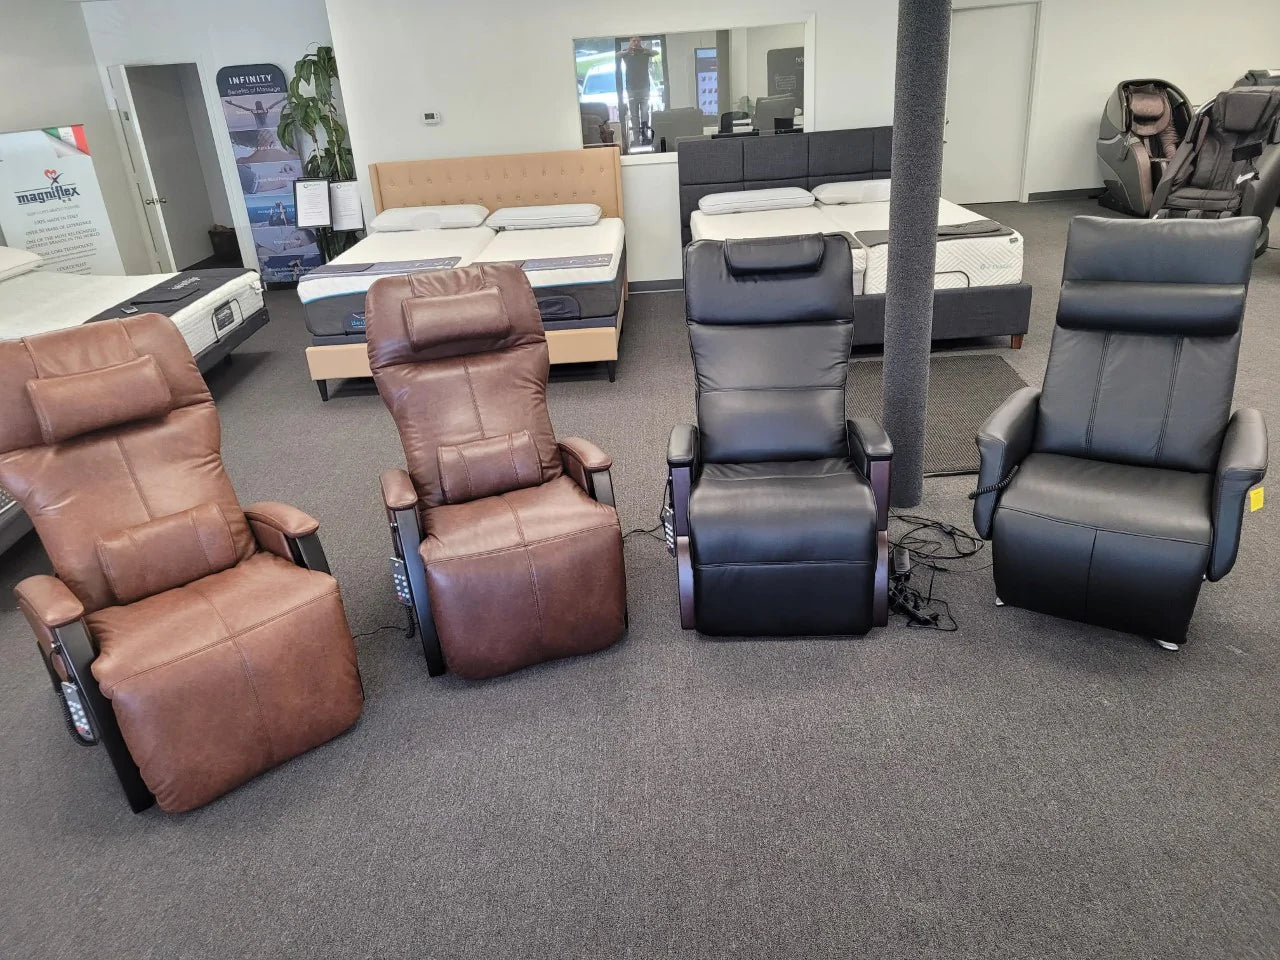 Svago Zero Gravity Recliners add a modern touch to your home while reducing stress and bringing value to your health.